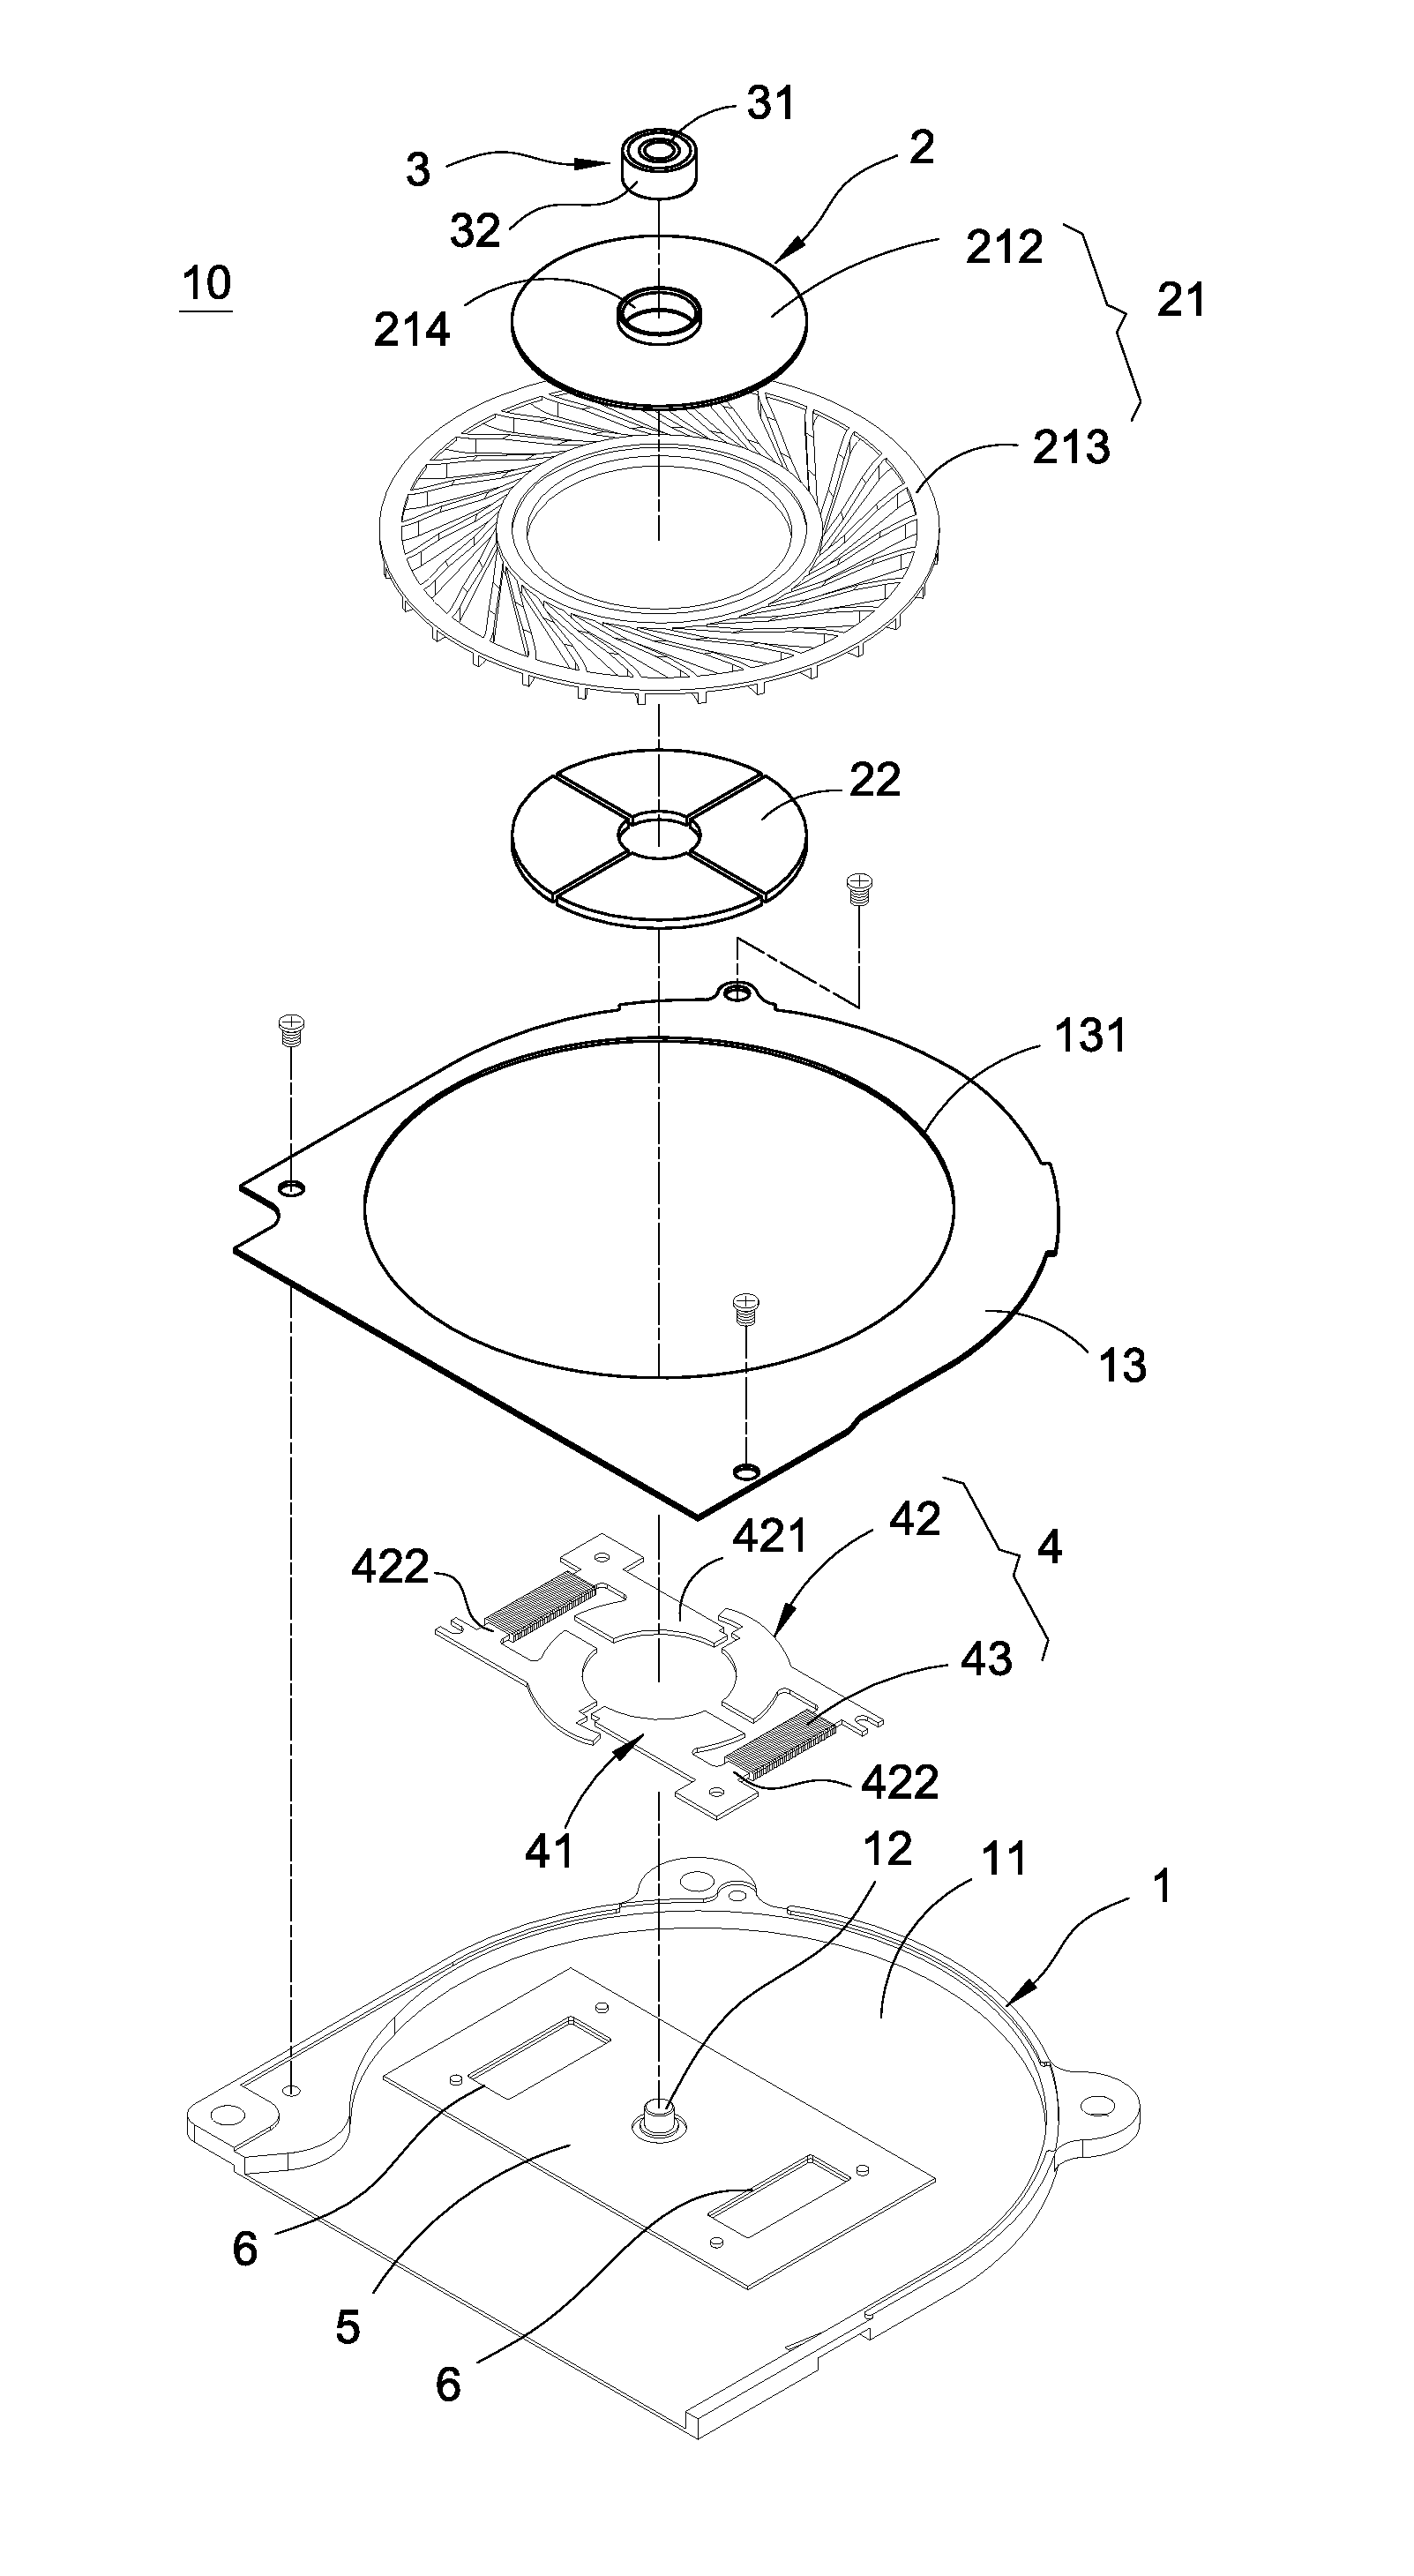 Shaftless fan structure having axial air slit